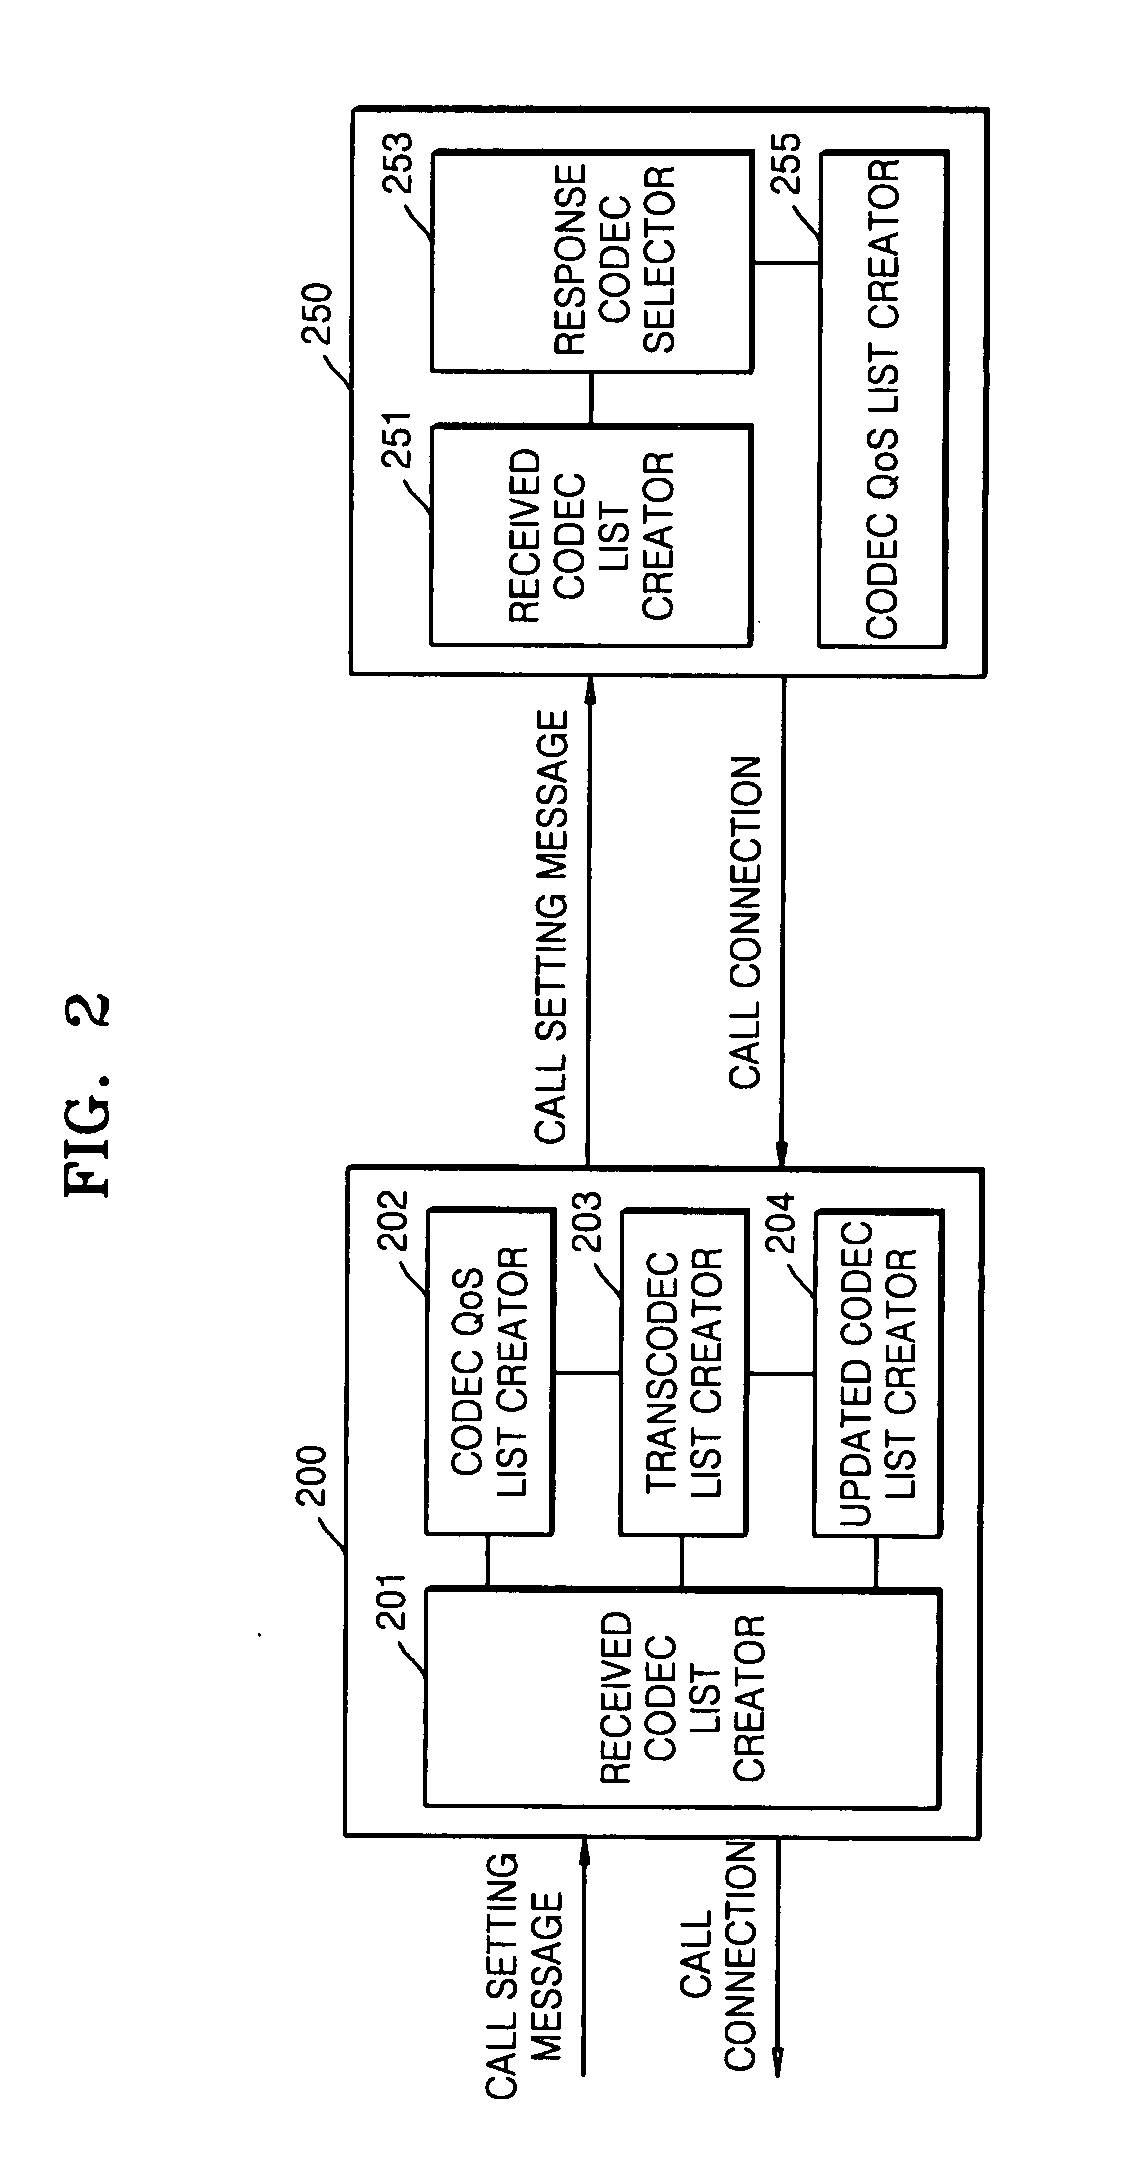 Apparatus and method for minimizing number of transcodings in multi-network multi-codec environment